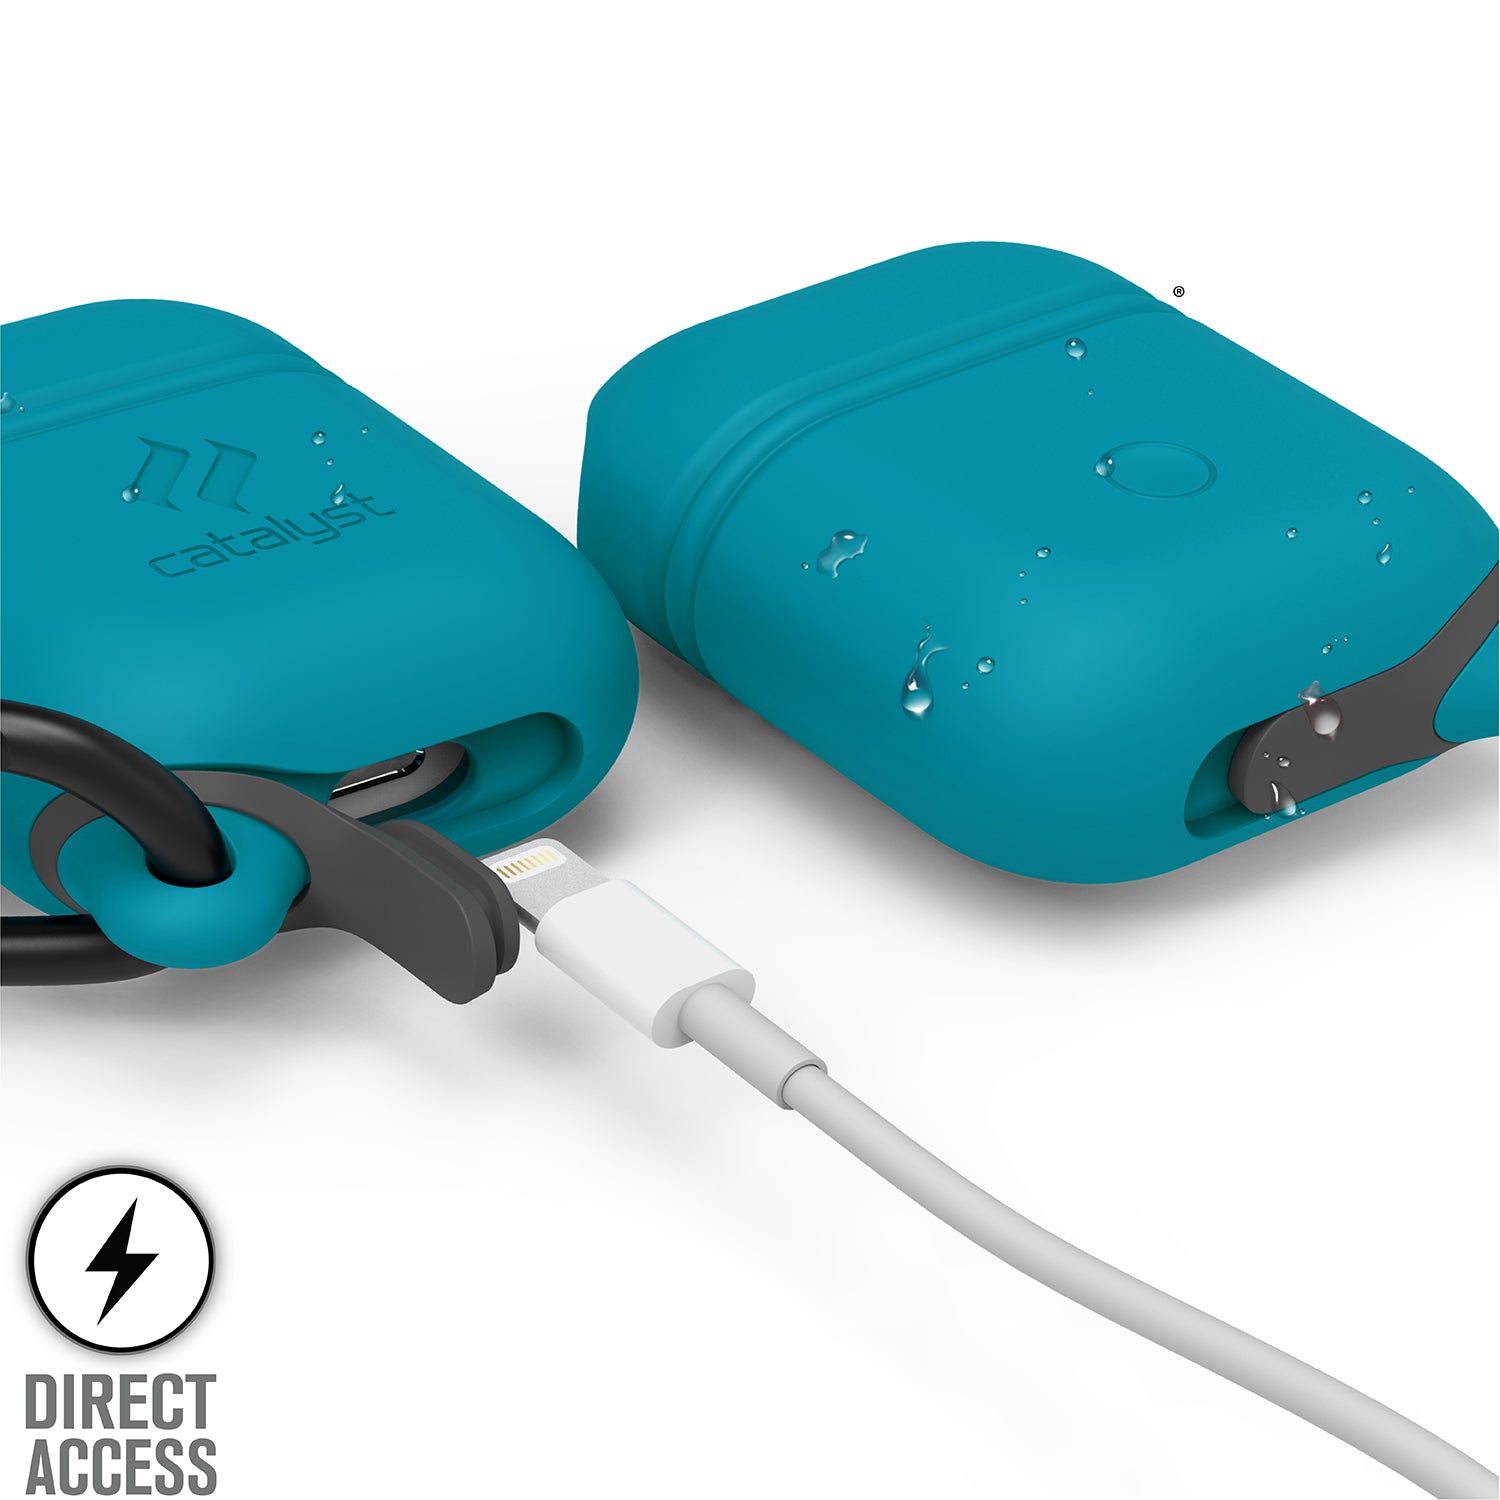 Catalyst airpods gen2/1 waterproof case + carabiner showing the front and back with lightning port in glacier blue text reads direct access